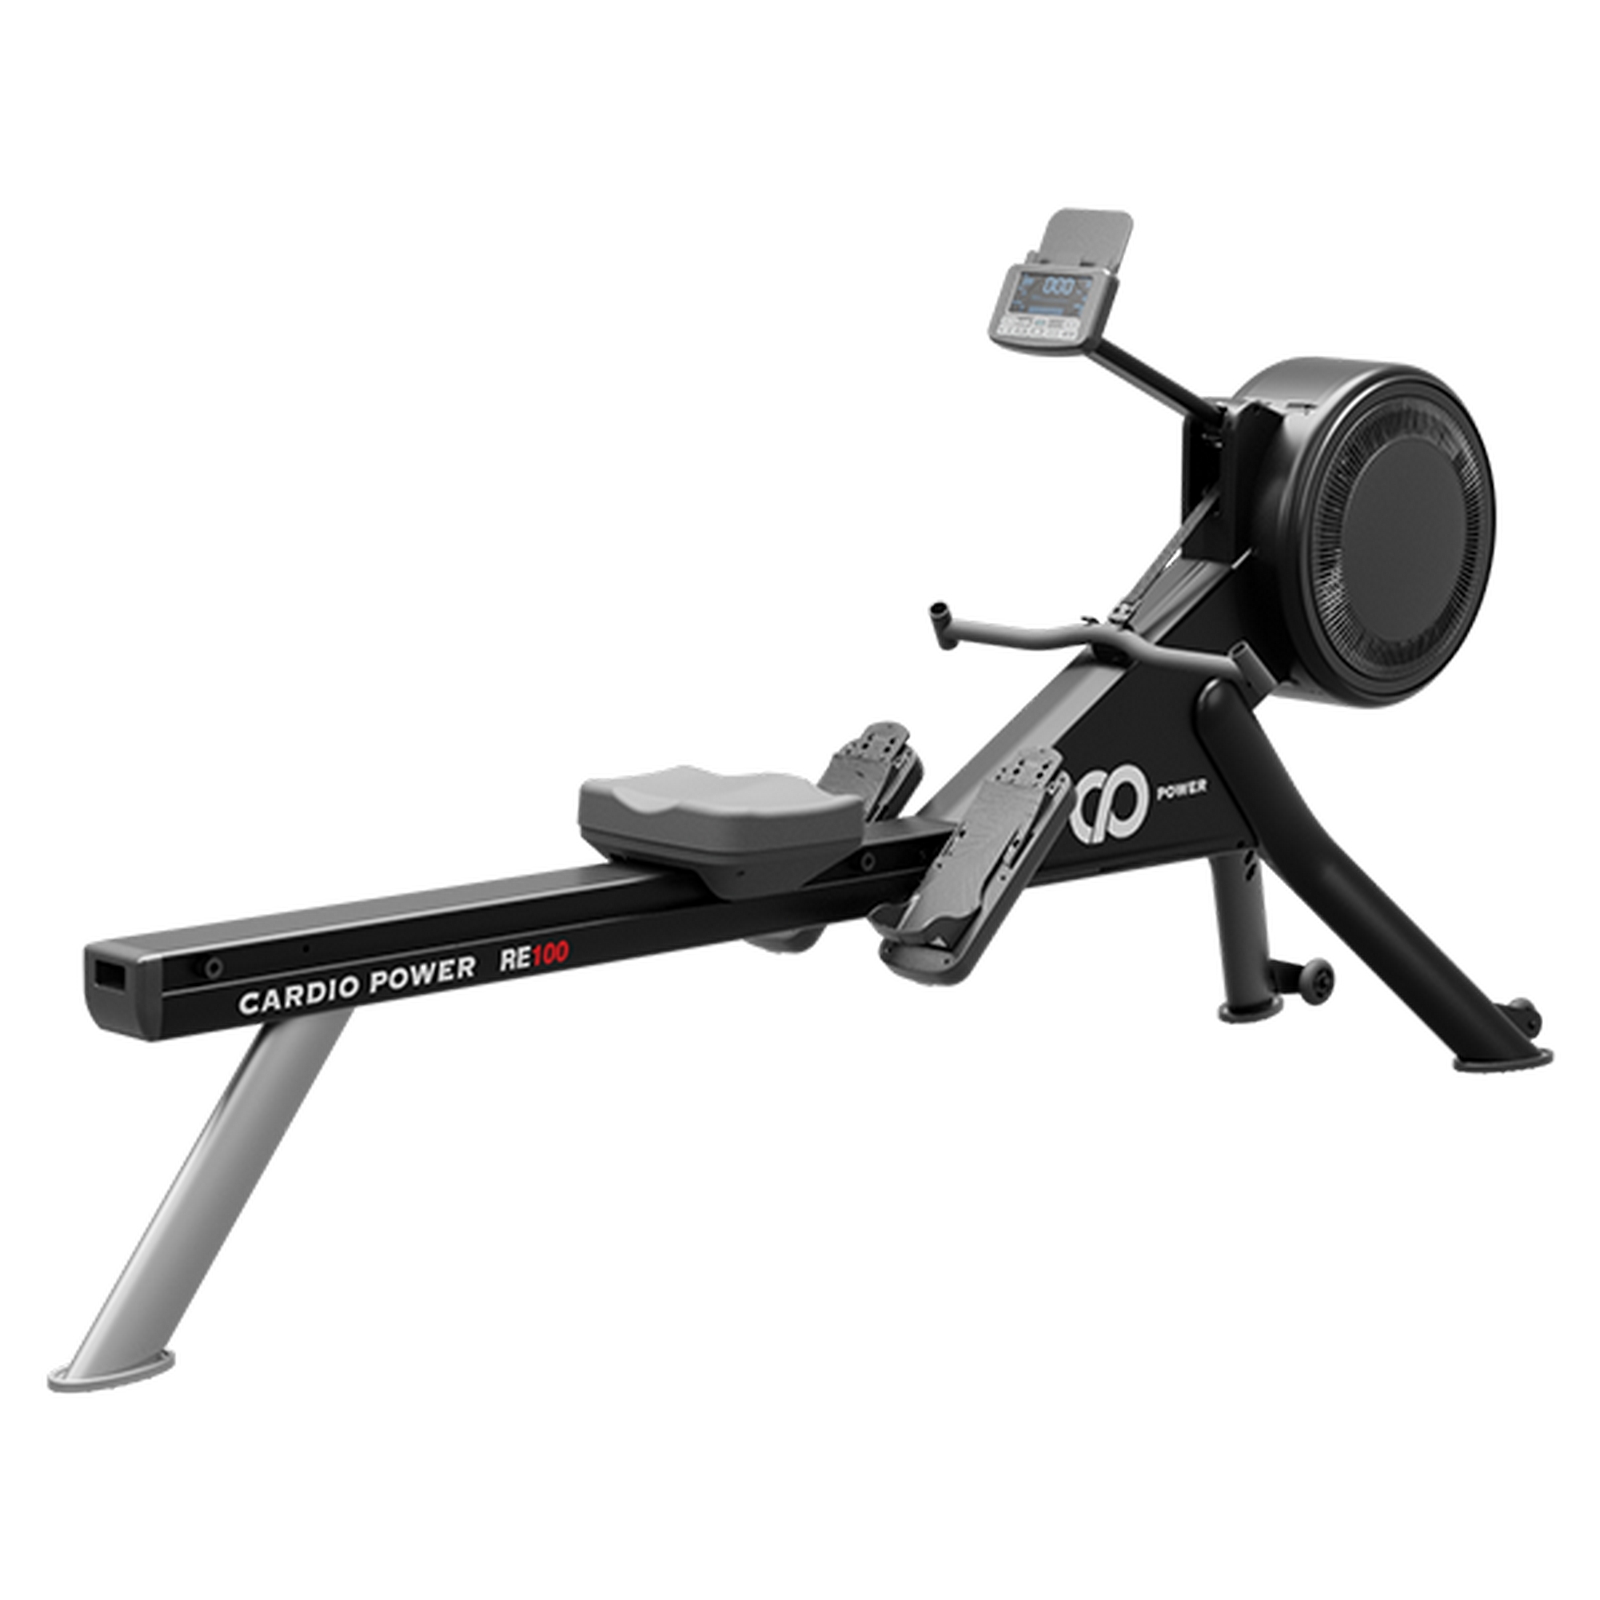   CardioPower RE100